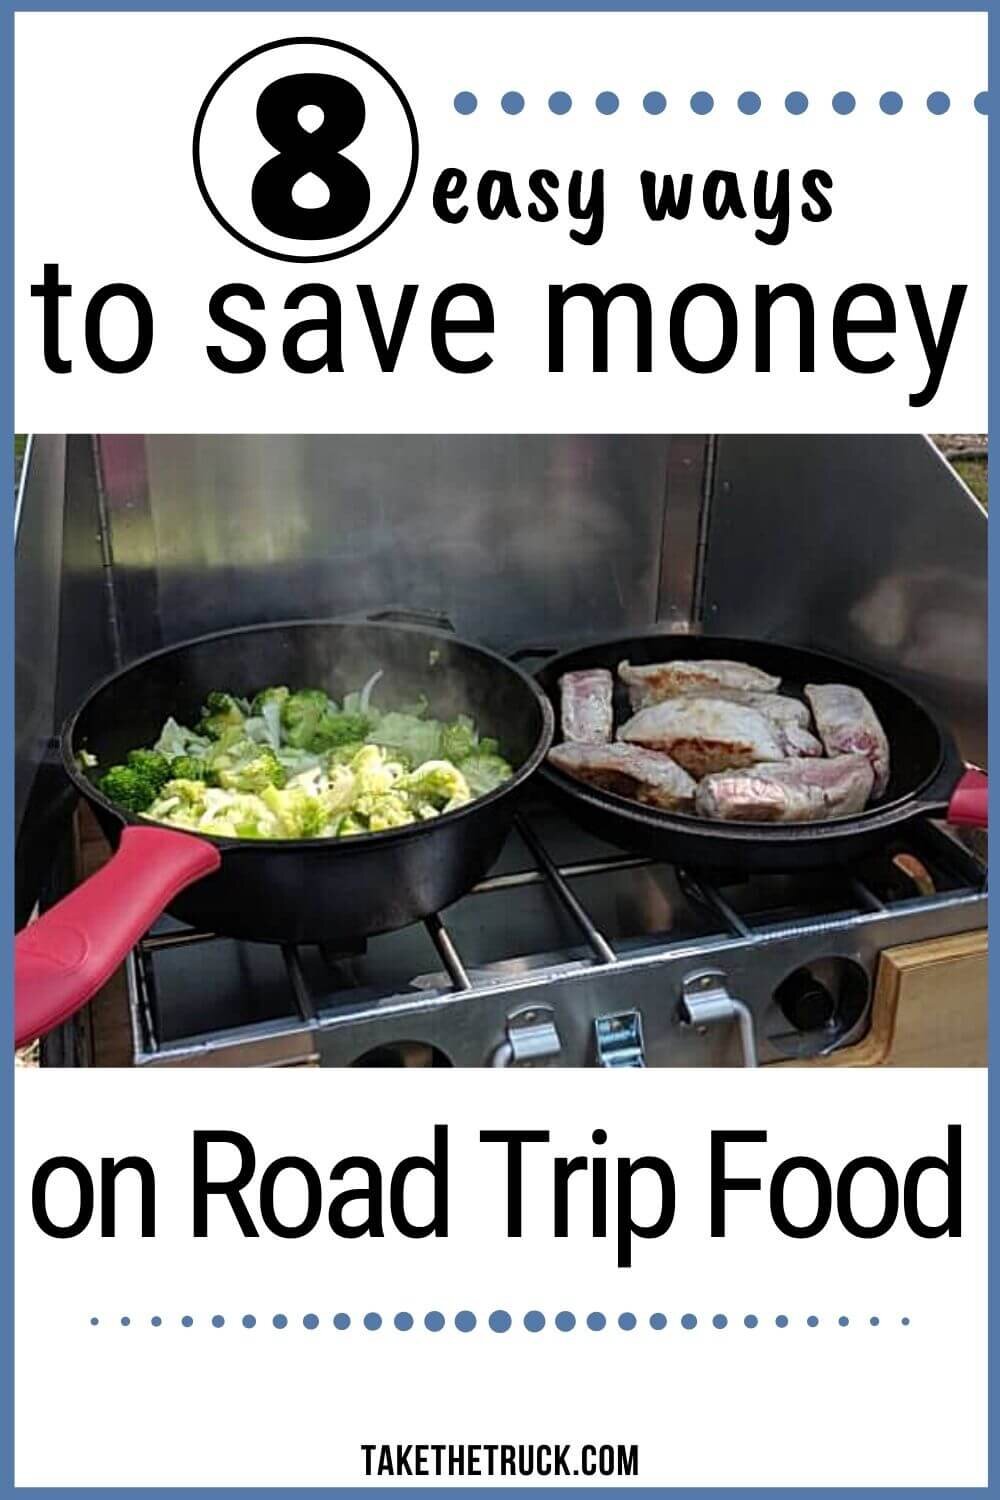 Learn how to save money on food on a road trip with these 8 simple road trip food and meal tips. Budget road trip meals and food can be good, healthy, and help you save money.